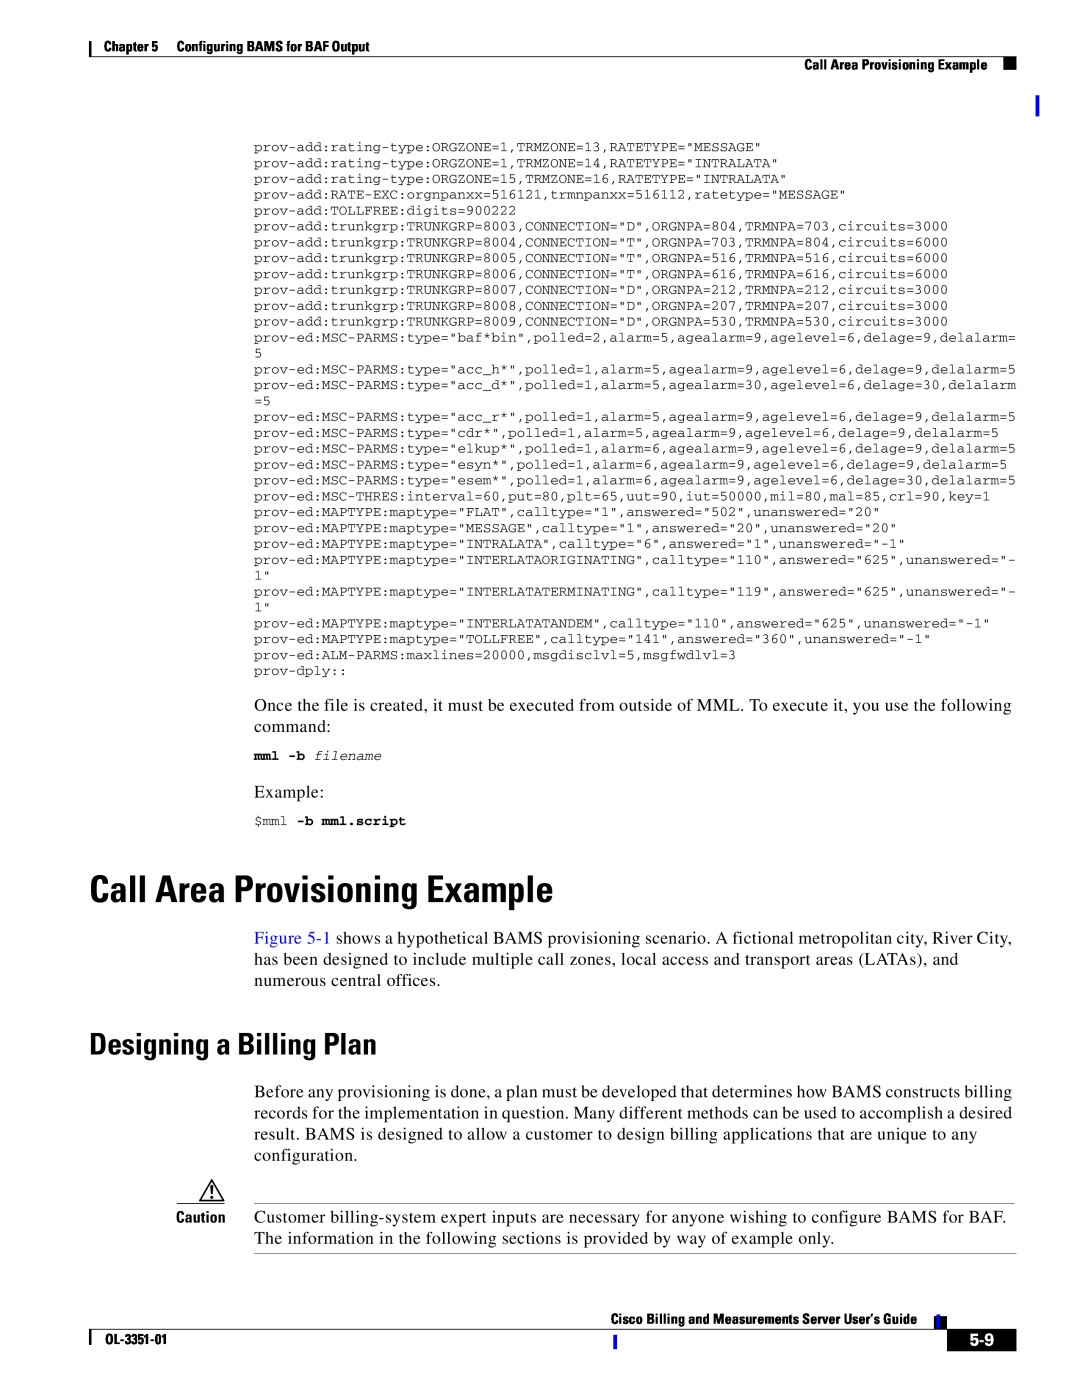 Cisco Systems OL-3351-01 manual Call Area Provisioning Example, Designing a Billing Plan 